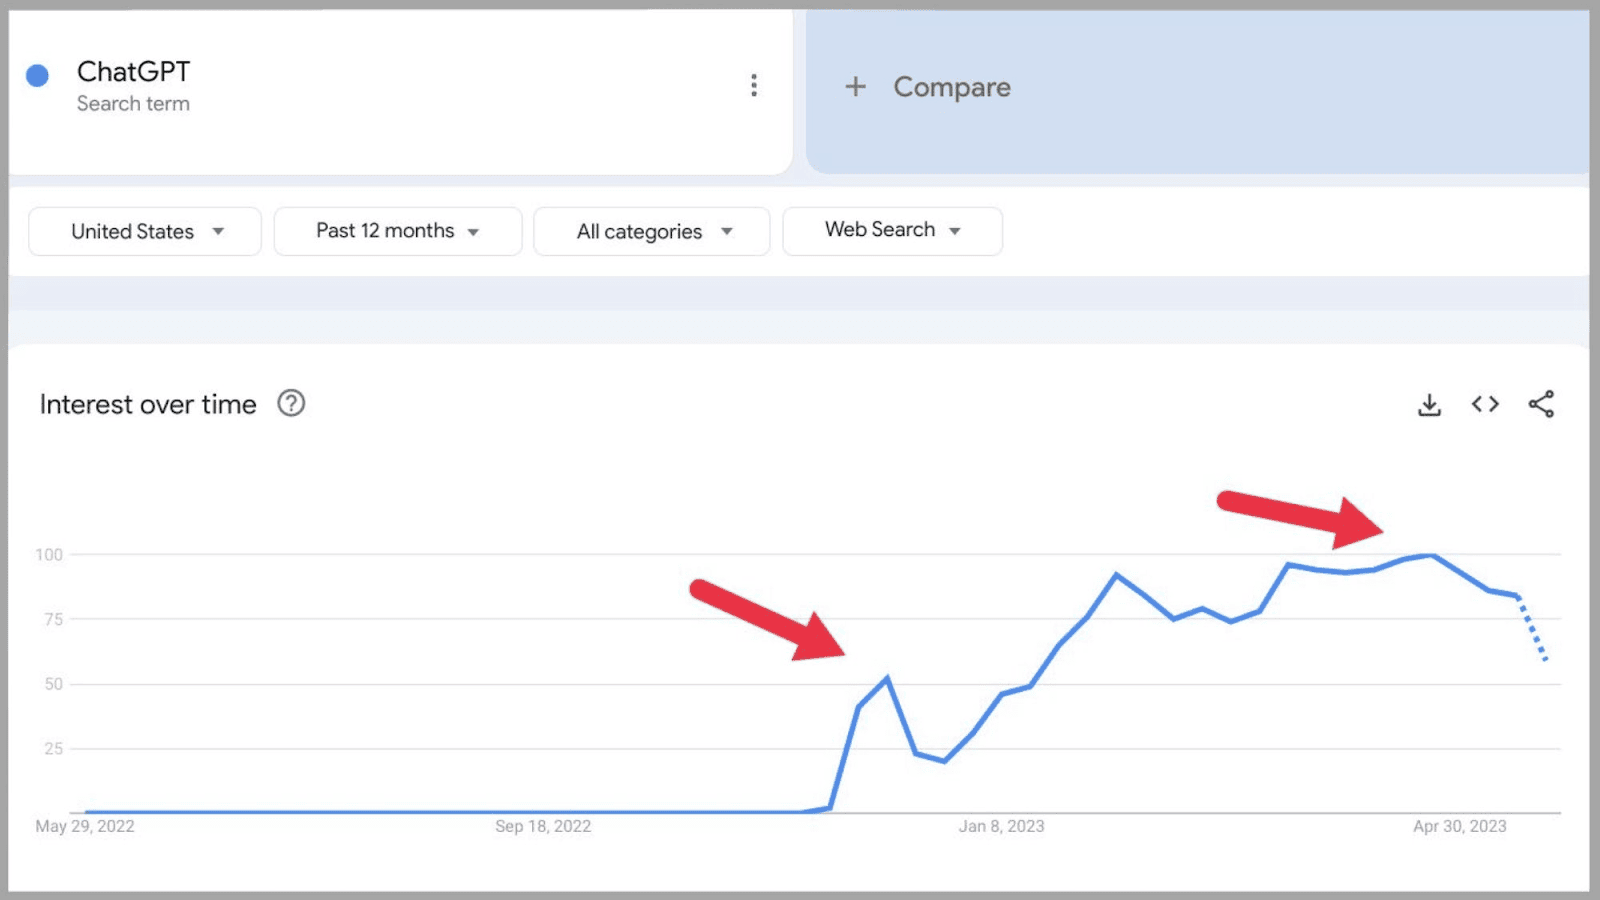 See how ChatGPT search surged over time